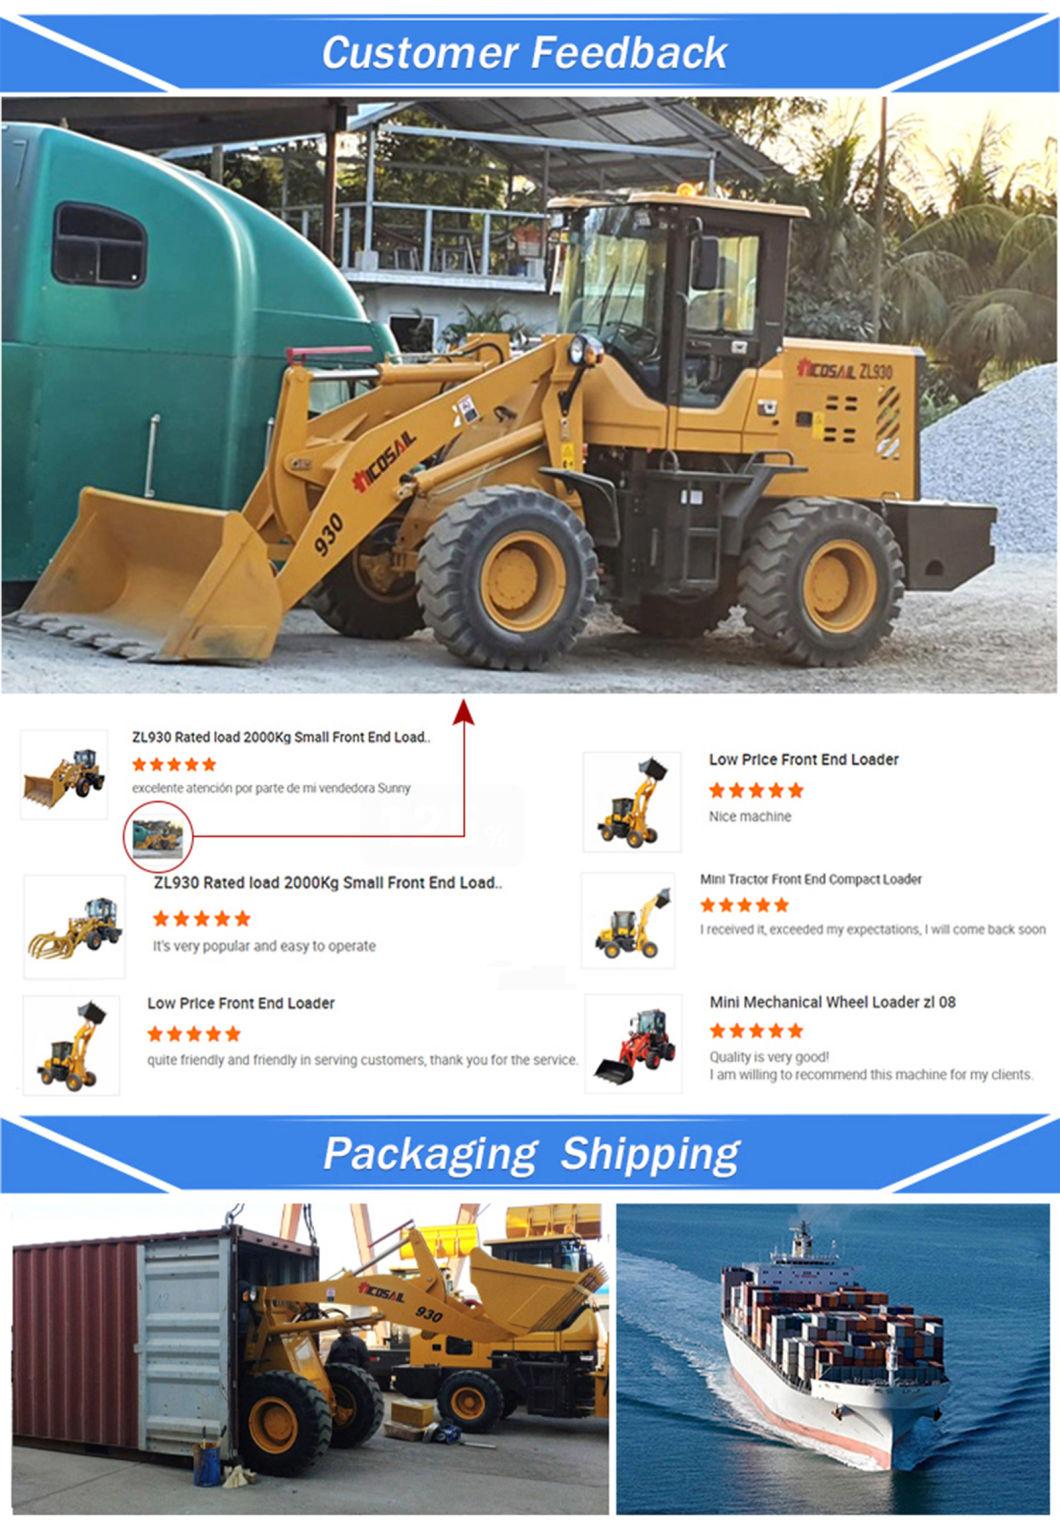 Advanced Technology Hydraulic Articulated Small Wheel Mini Loader From Japan